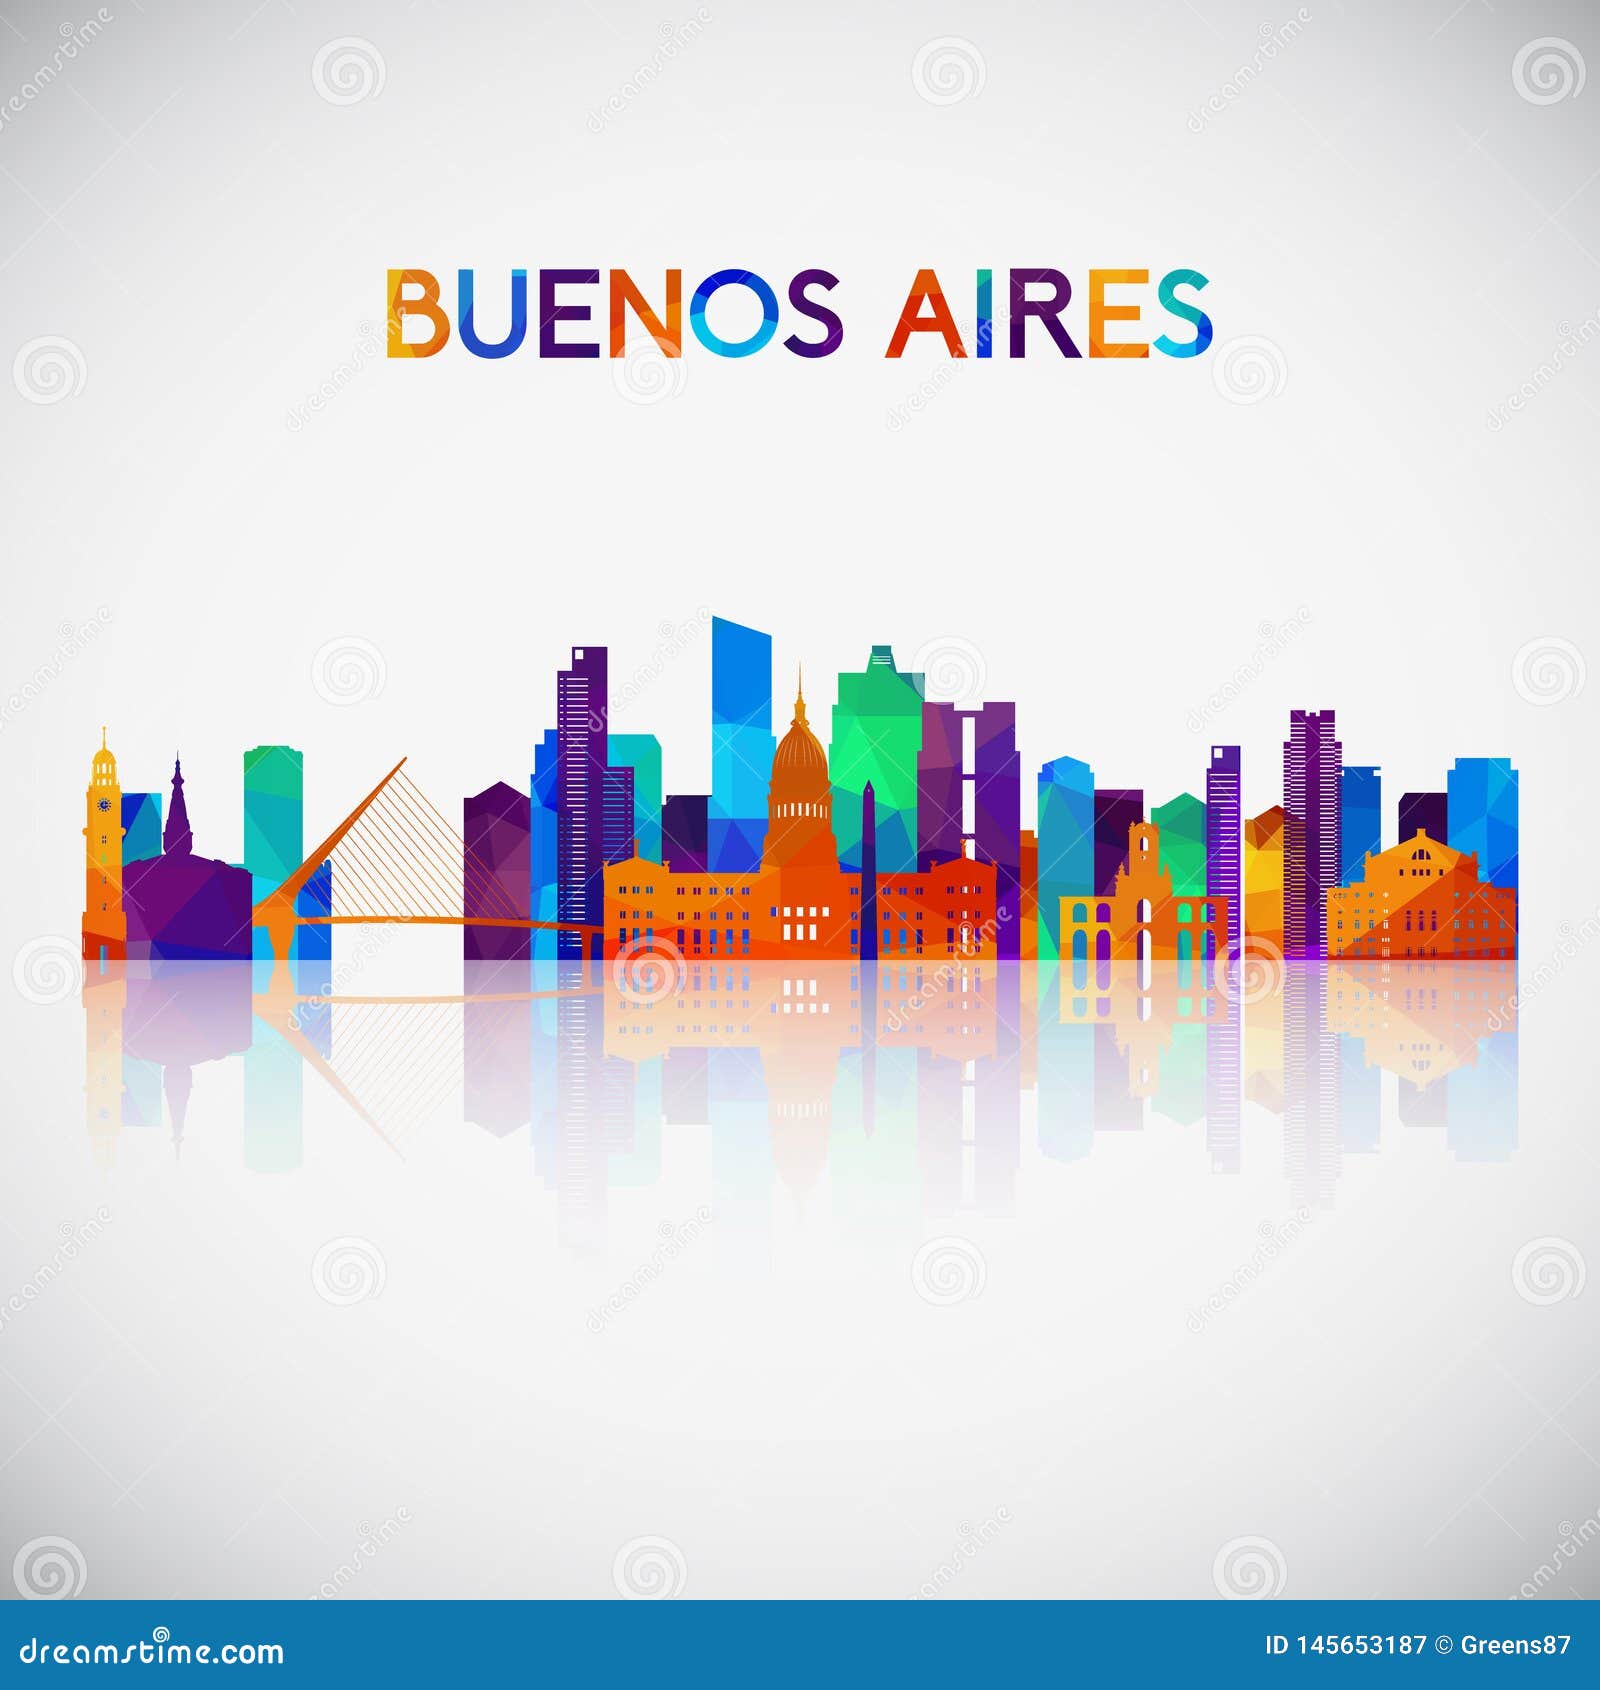 buenos aires skyline silhouette in colorful geometric style.